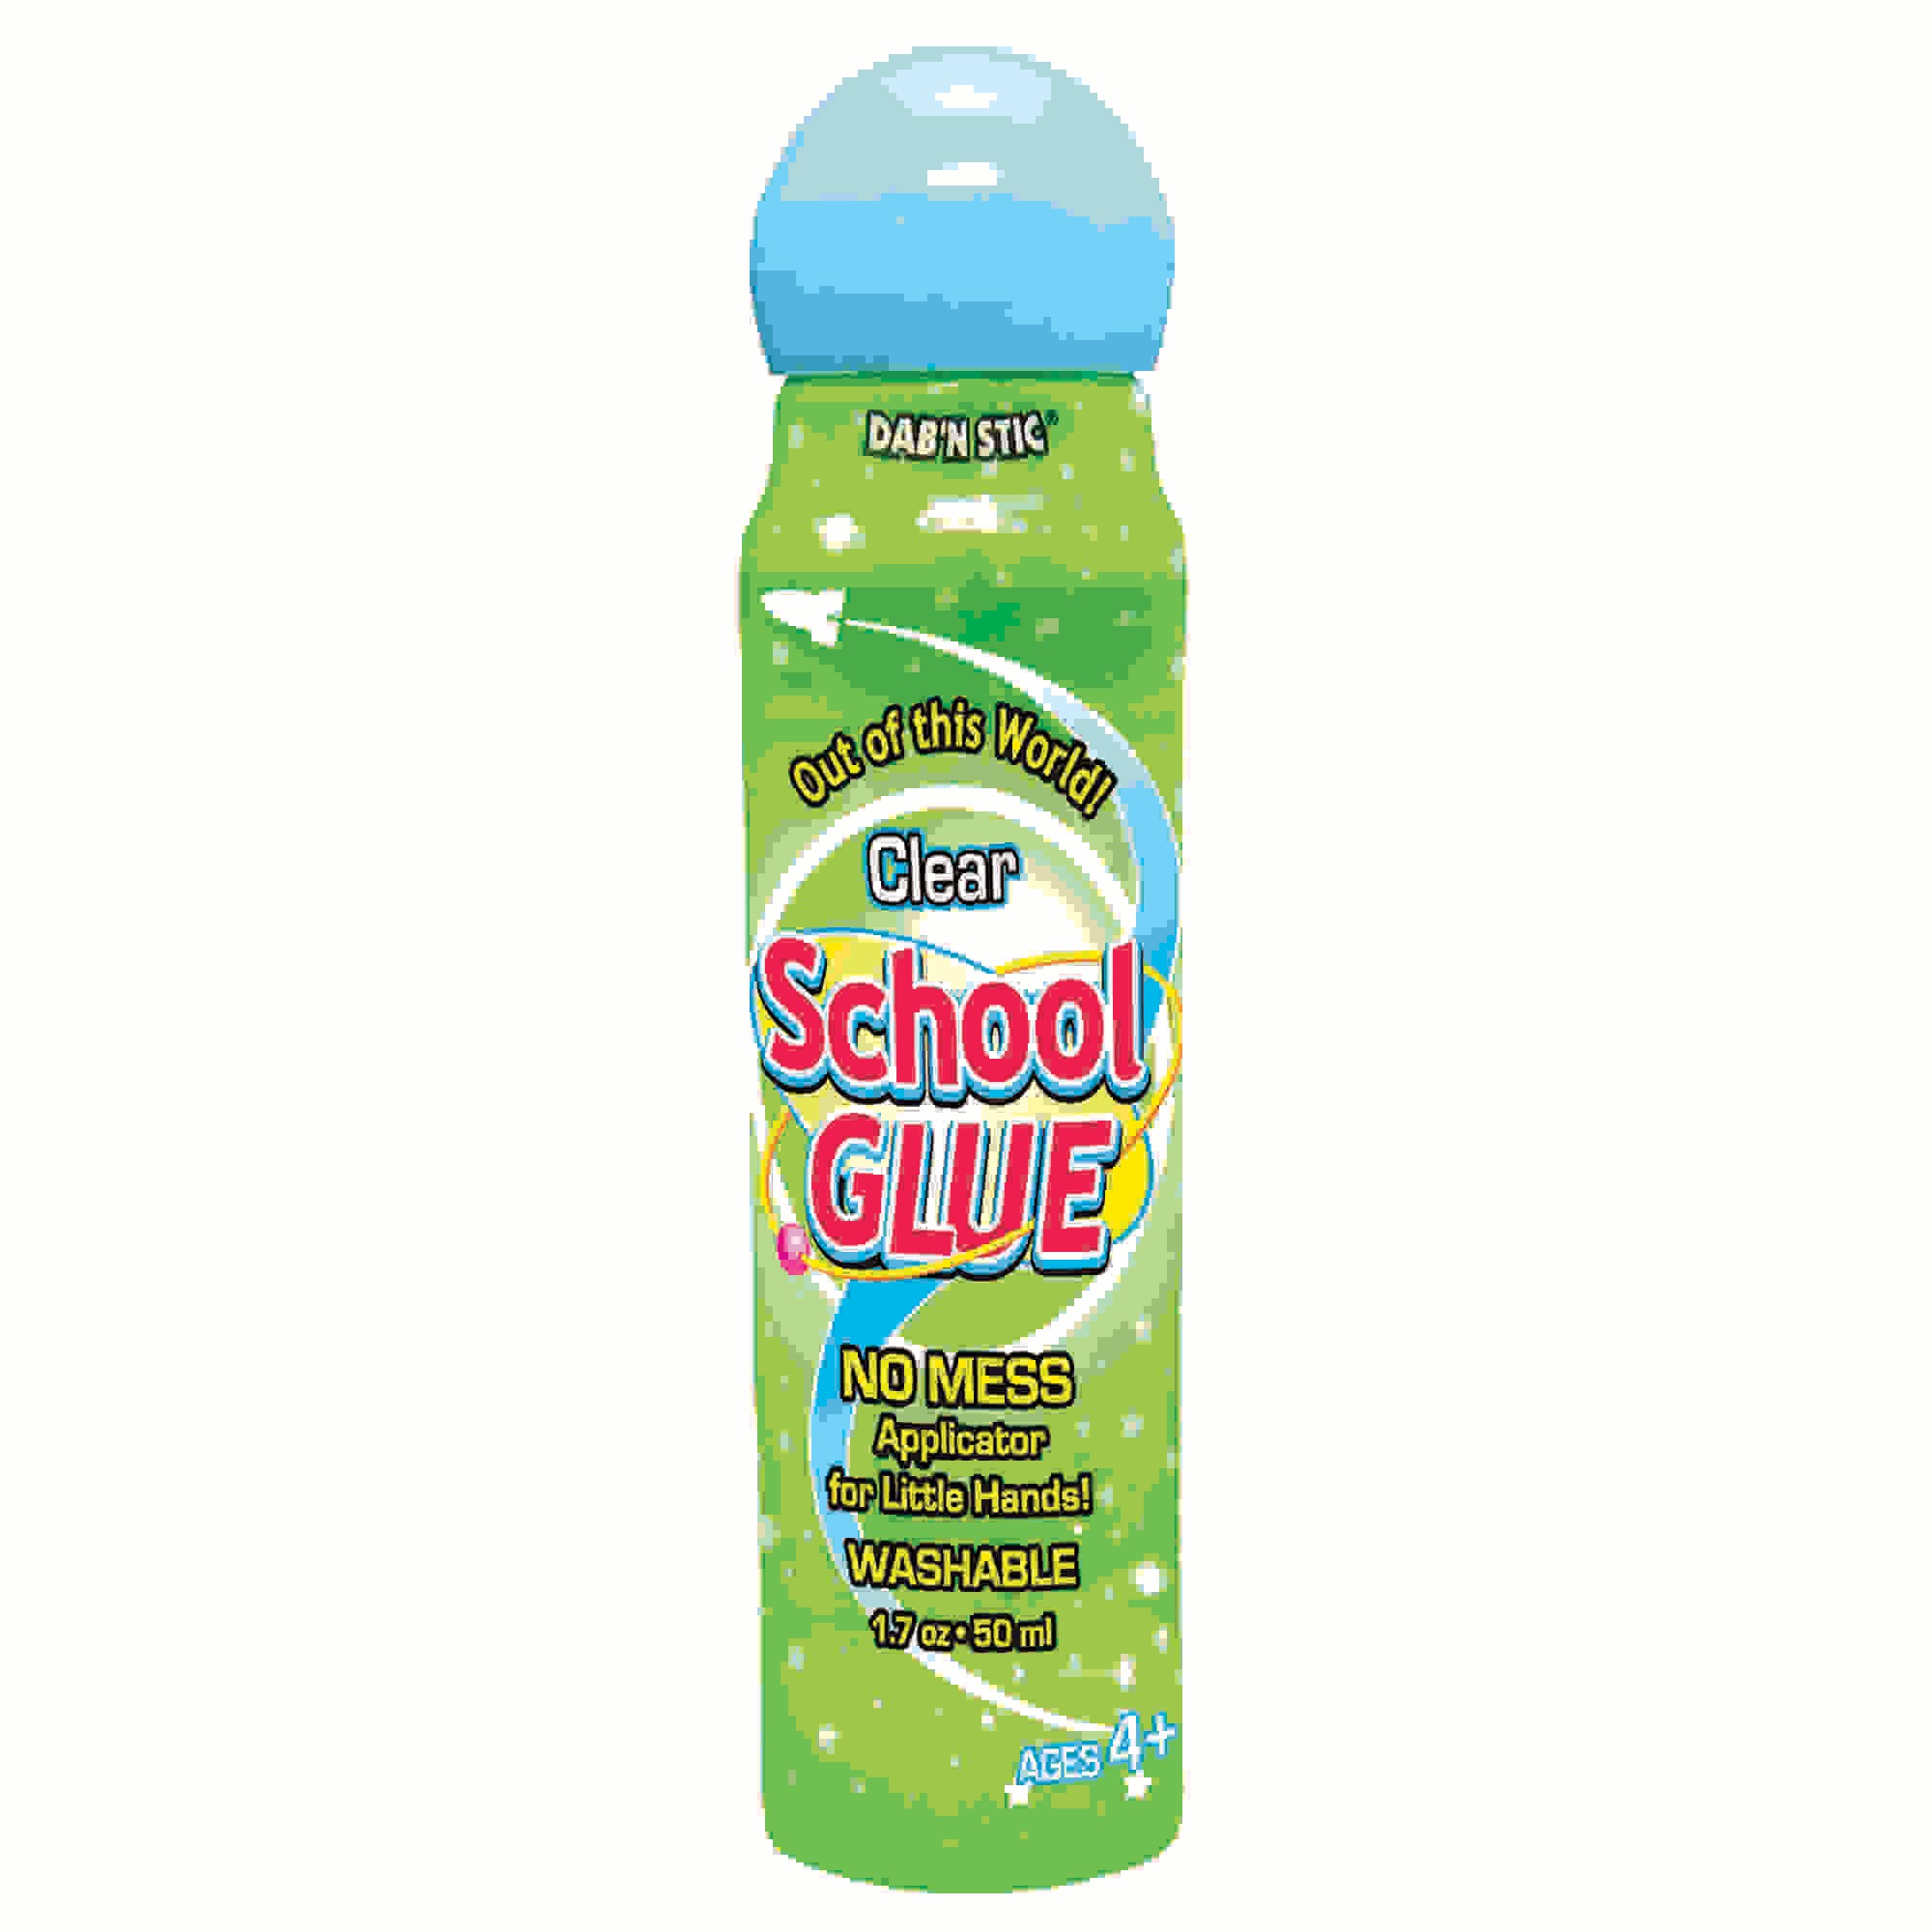 Dab'N Stic Non-Toxic Odorless School Glue, 1.75 oz Bottle, Dries Clear, Pack of 6